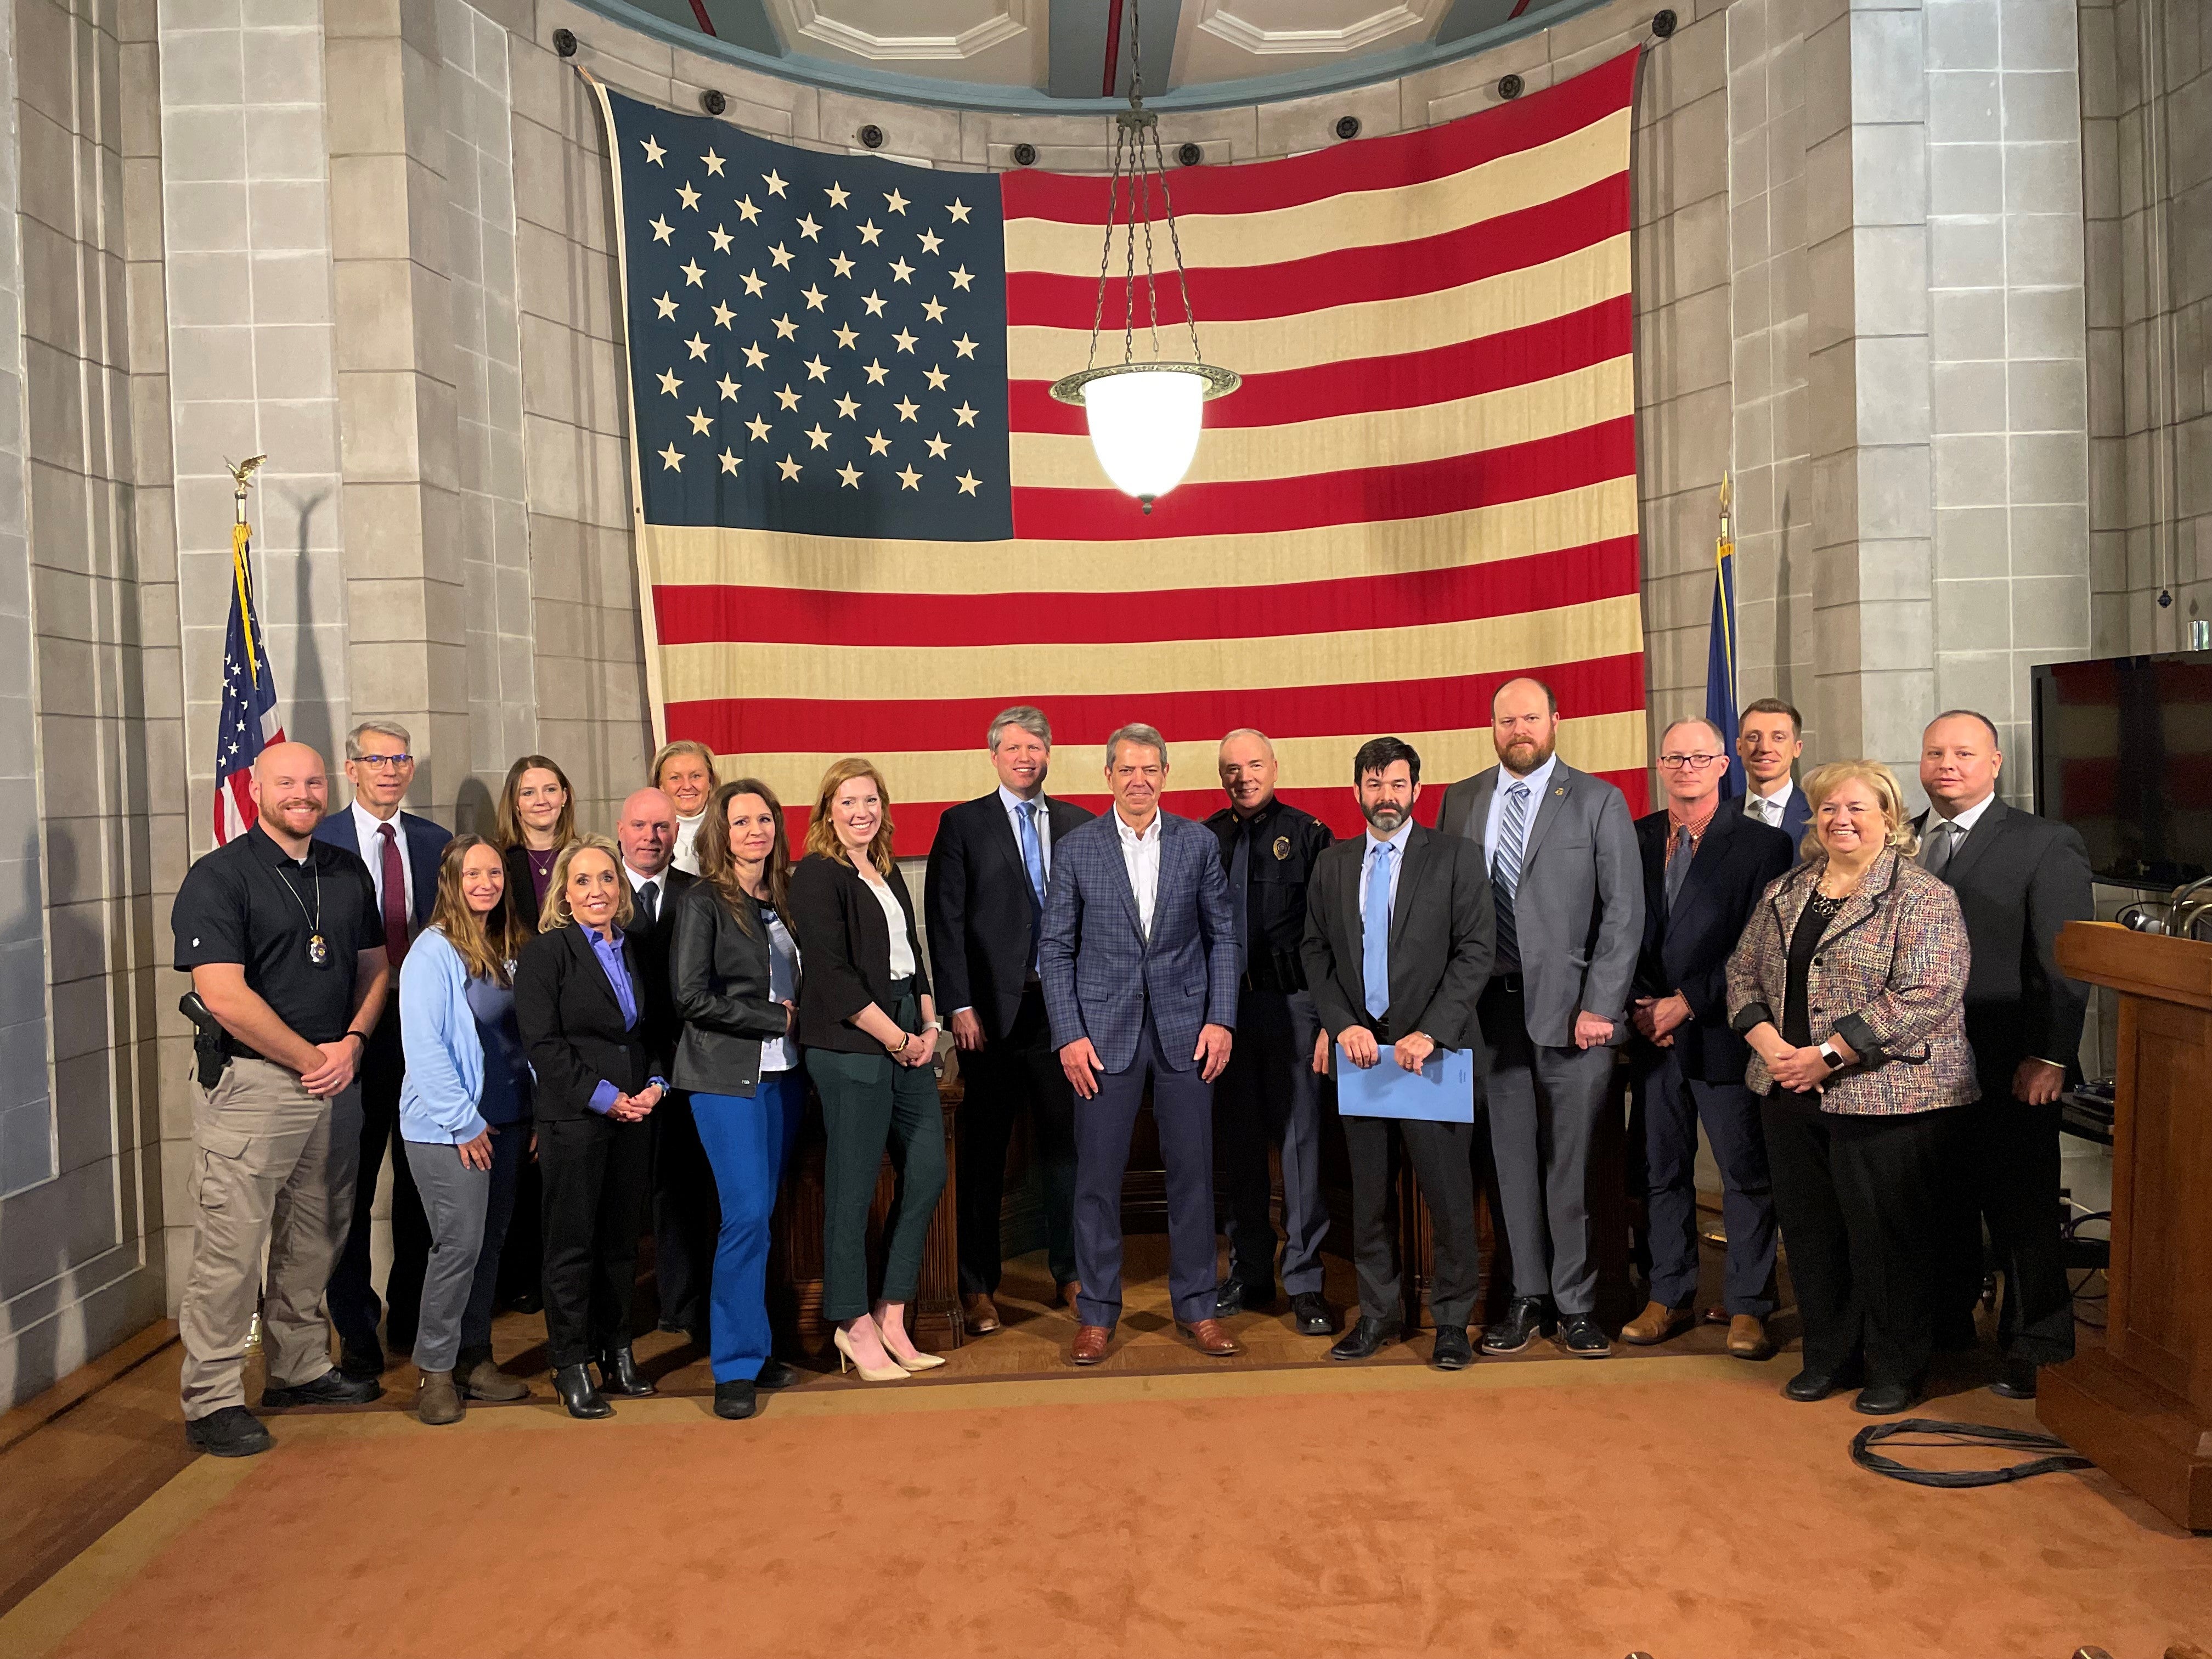 Pictured are Governor Jim Pillen, Lieutenant Governor Joe Kelly, Colonel John Bolduc, members of the Attorney General's Human Trafficking Task Force, and representatives of various agencies and organizations combatting human trafficking.